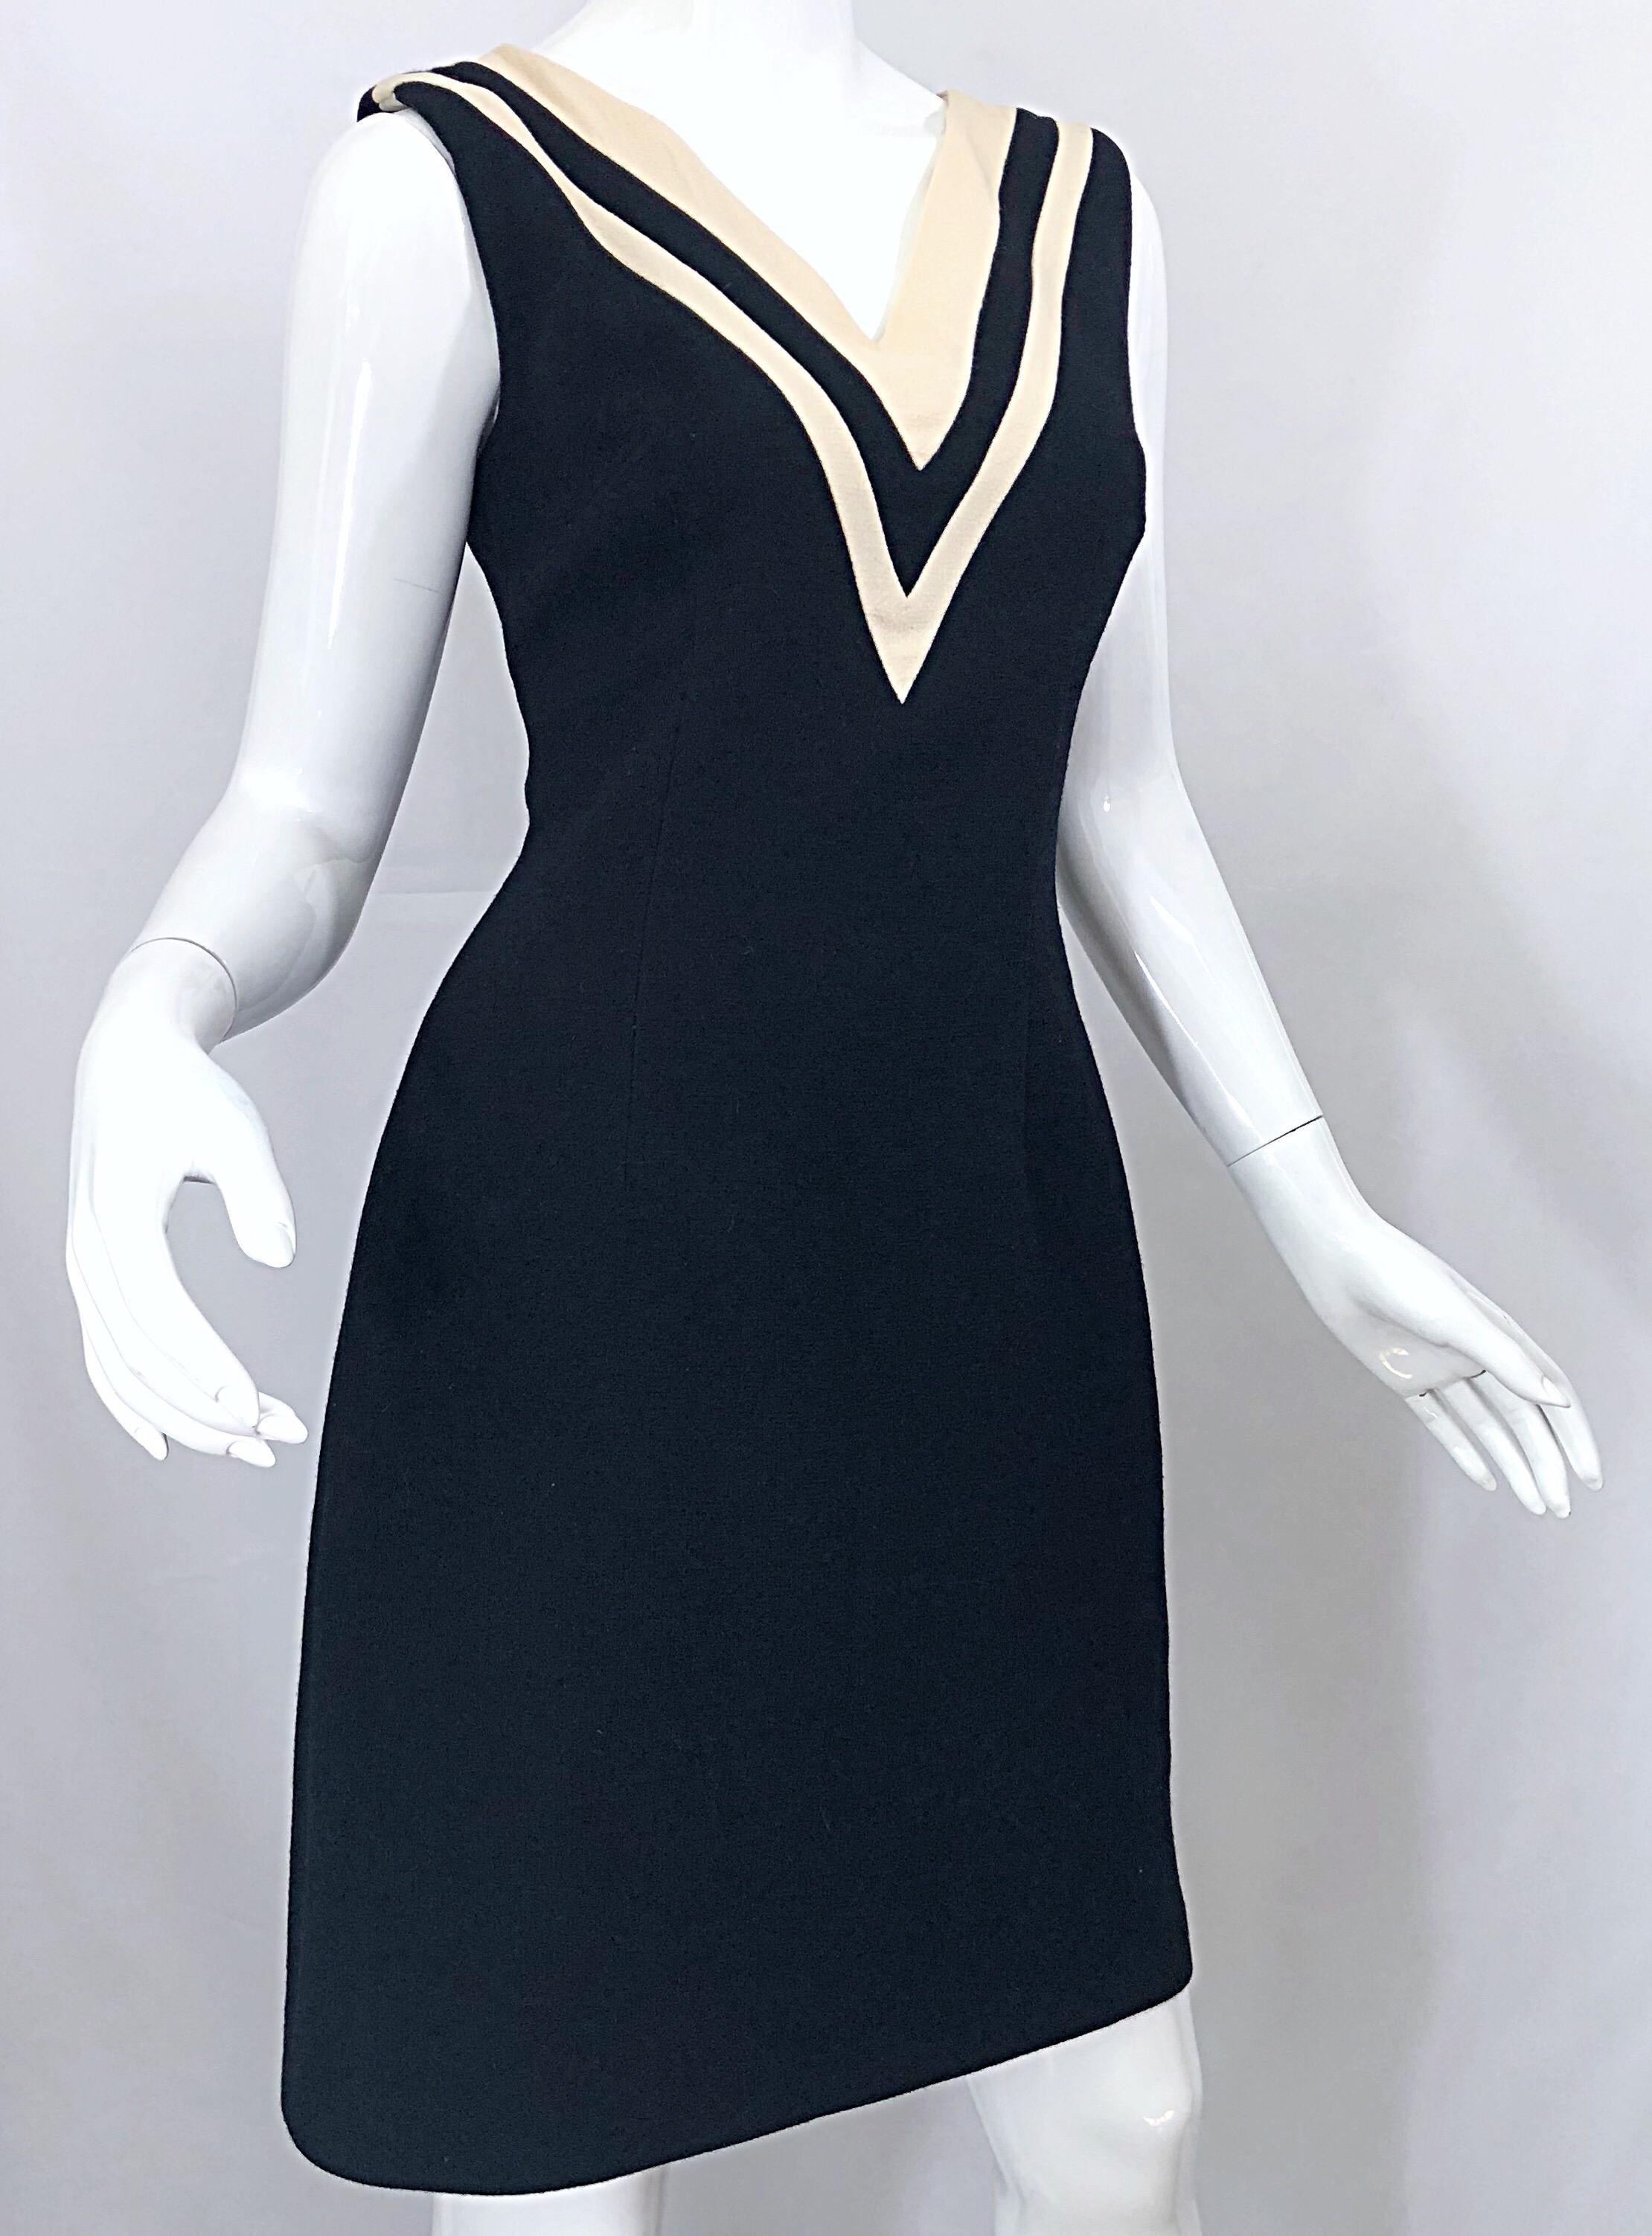 Women's Dolce & Gabbana Size 42 / US 6 Black and Ivory 1990s Does 1960s Wool Shift Dress For Sale